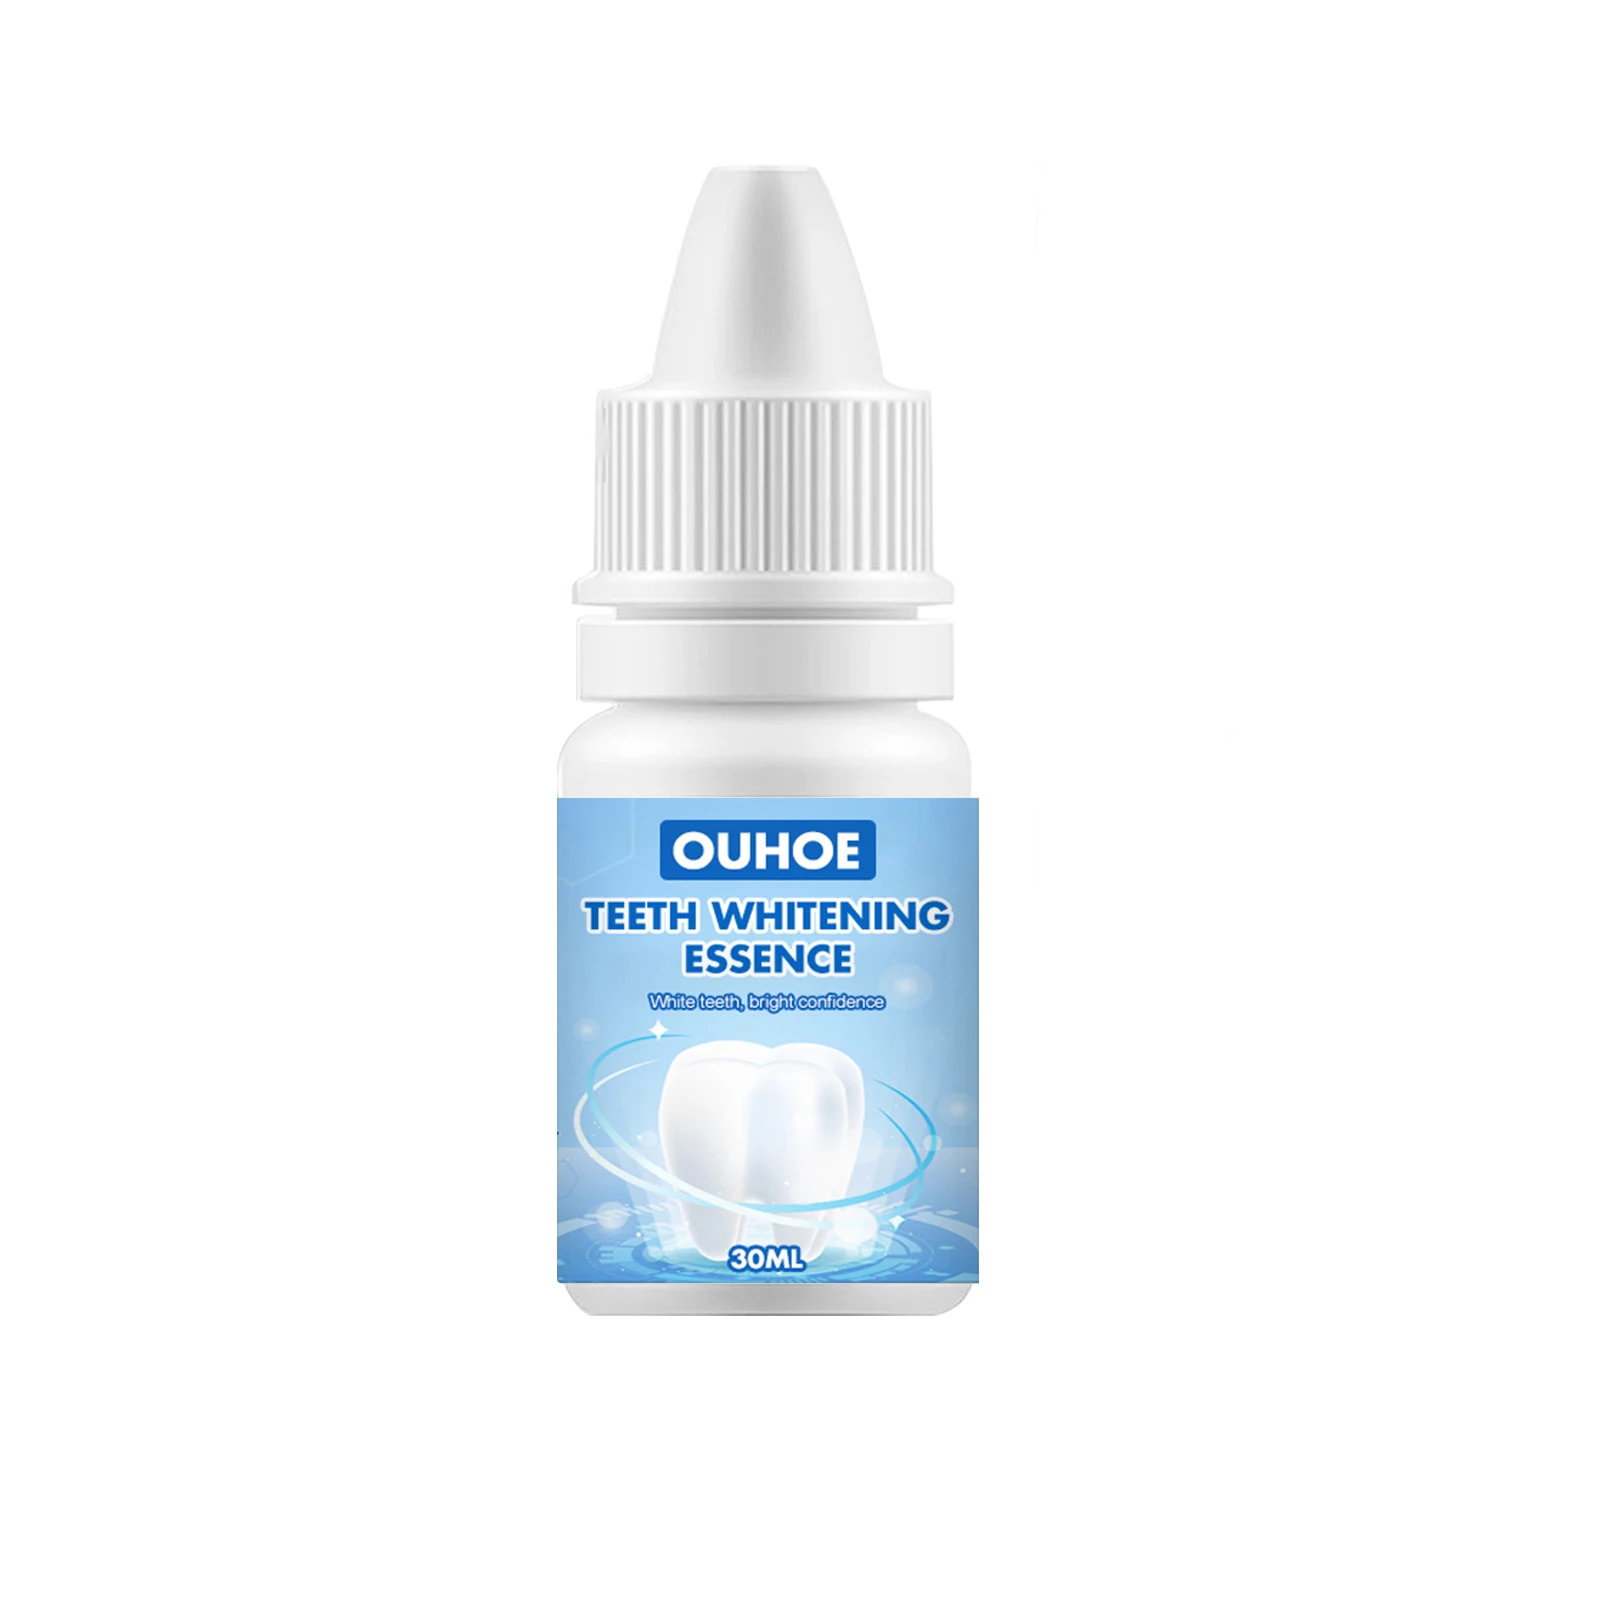 

OUHOE Teeth Whitening essence Tooth Bleaching Dental Remove plaque stain Clean whitening Nourish the teeth